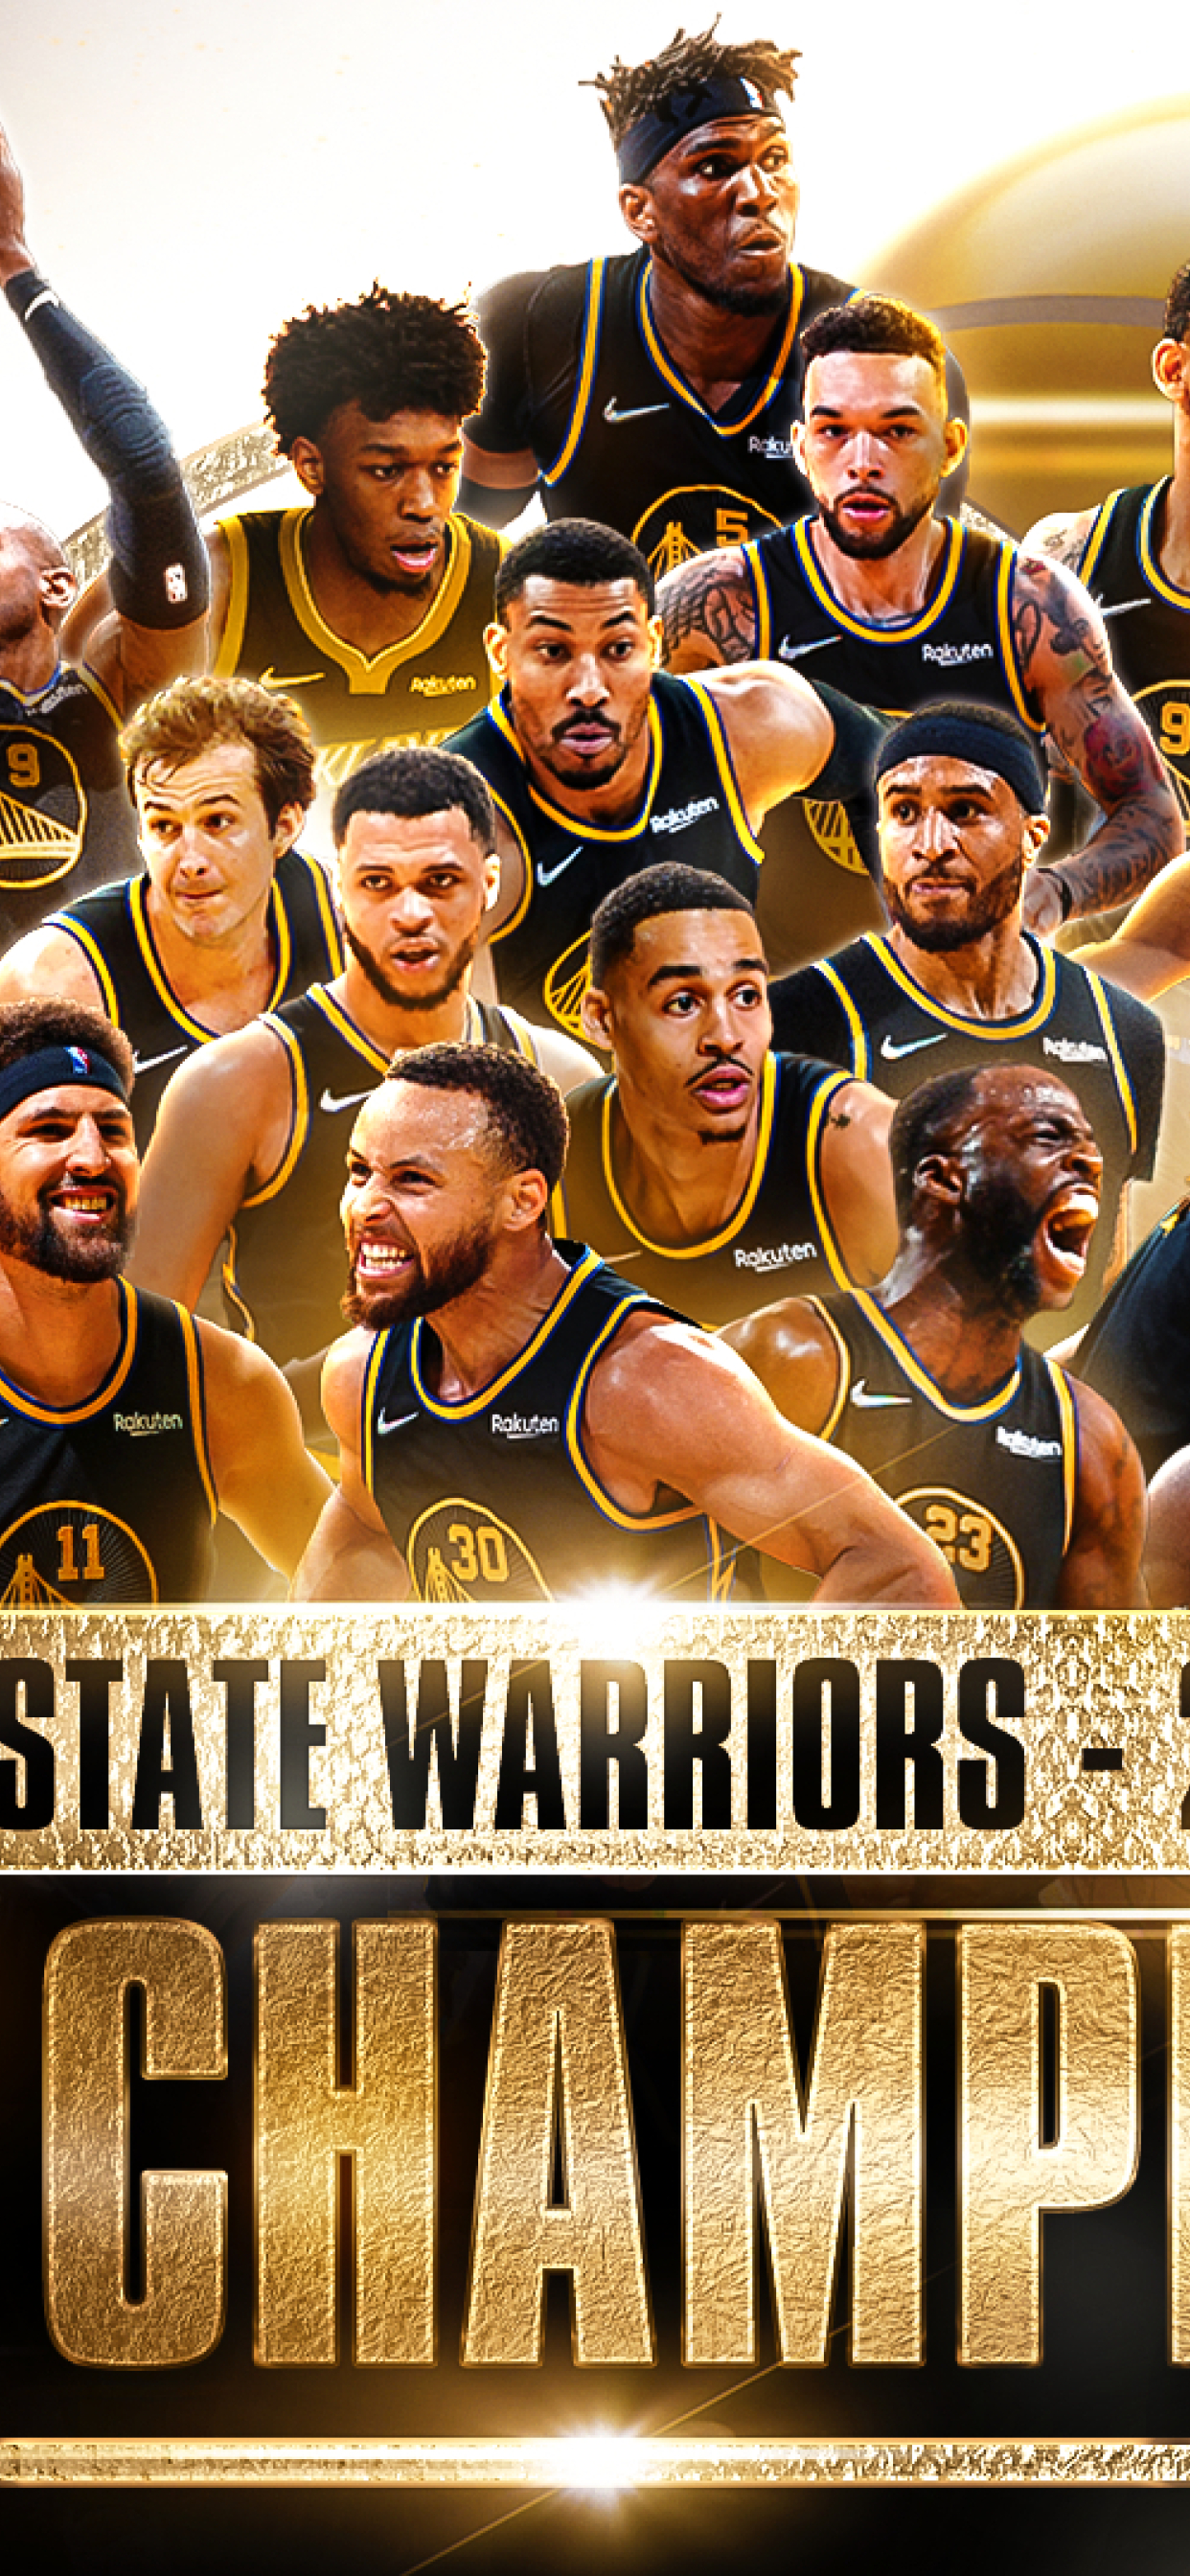 10 New Warriors Iphone 6 Wallpaper FULL HD 1080p For PC Desktop  Golden  state warriors wallpaper Warriors wallpaper Golden state warriors